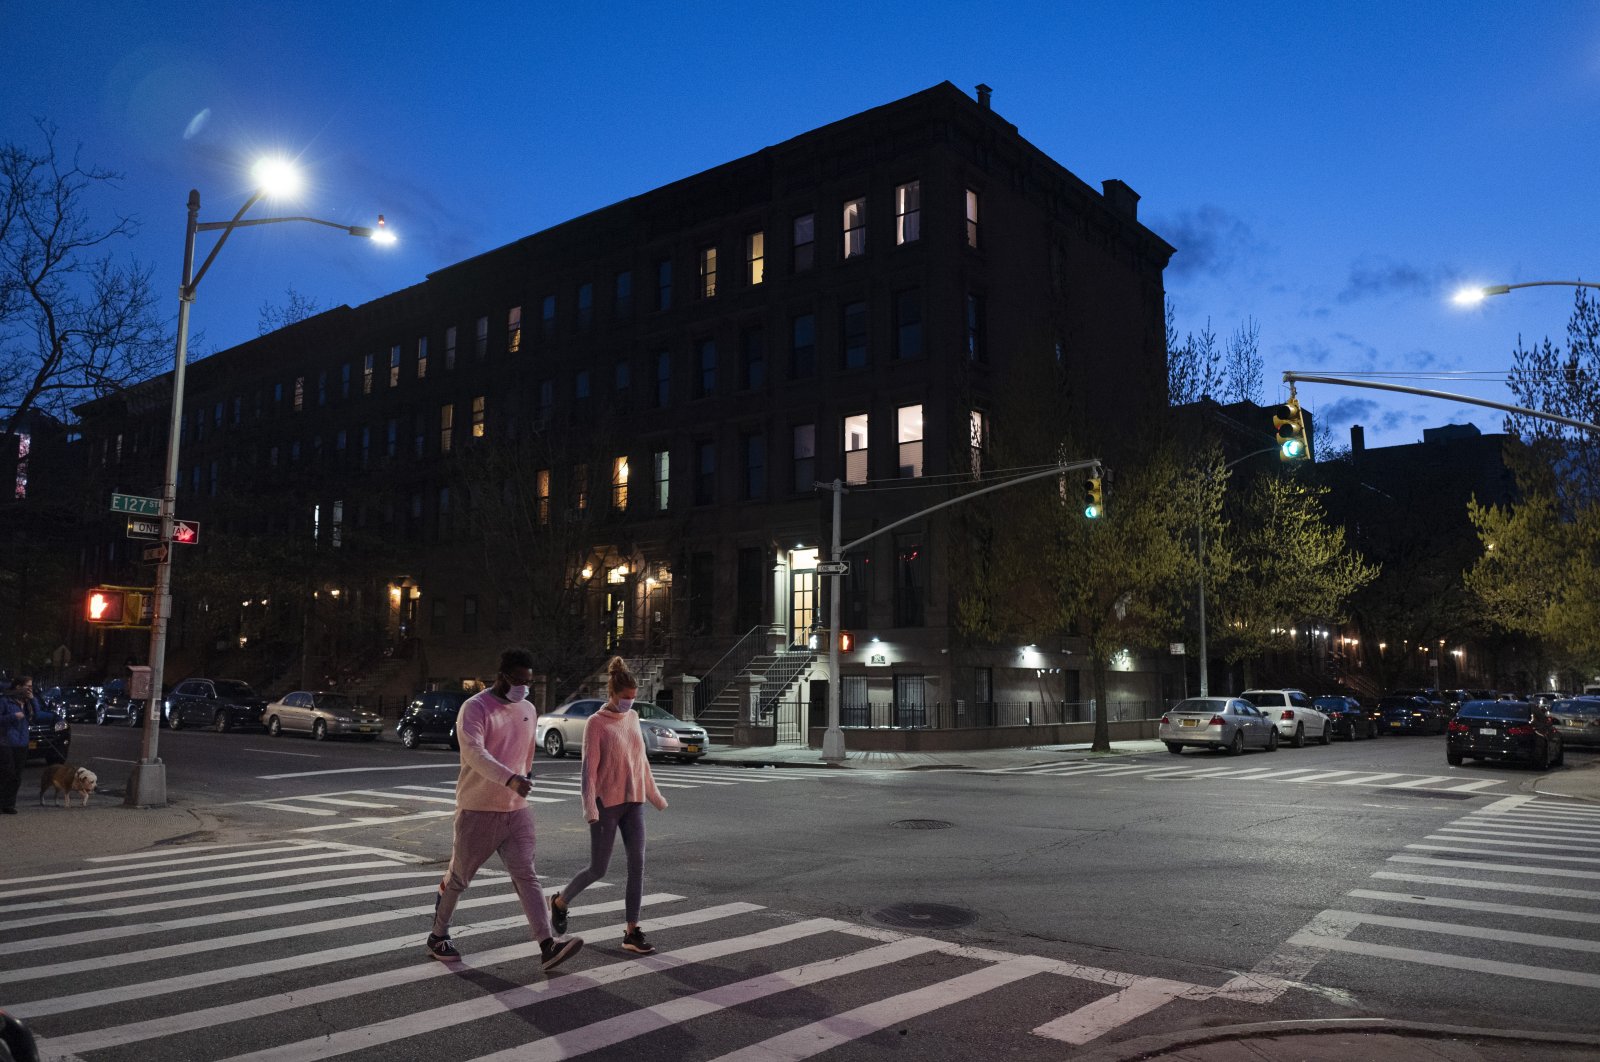 People wearing masks cross the street at Langston Hughes Place in Harlem during the coronavirus pandemic, in New York City, New York, U.S., April 15, 2020. (AP Photo)